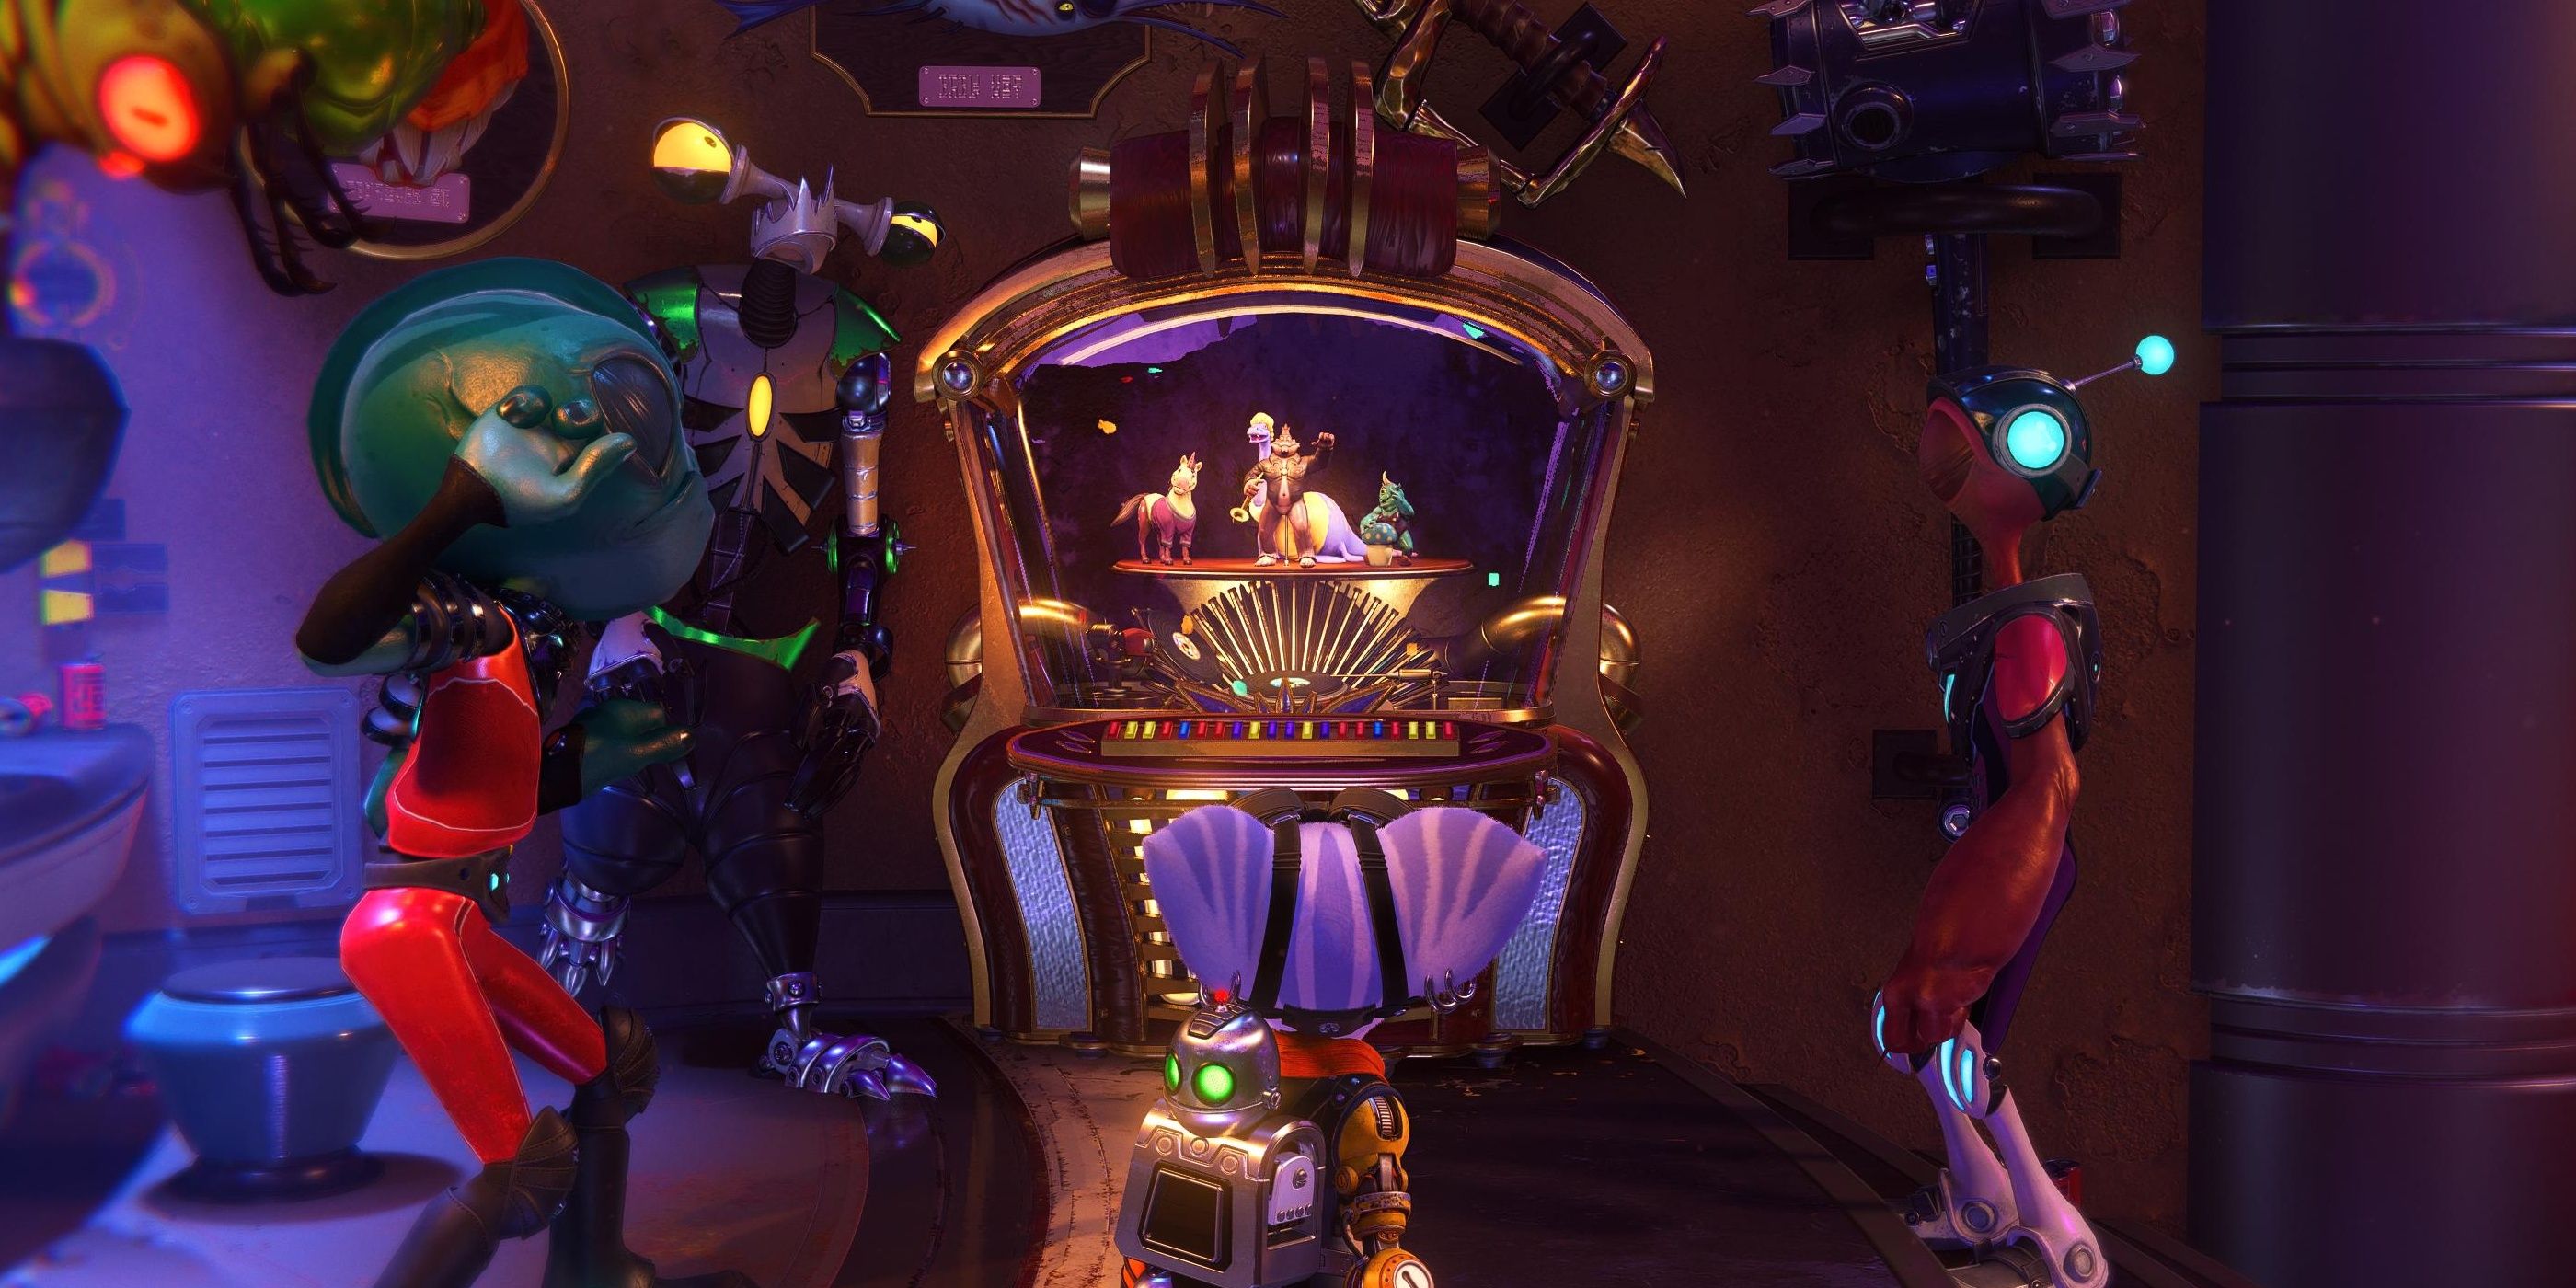 A shot of the Jukebox in Ratchet and Clank: Rift Apart with NPCs and Rivet gathered around it.